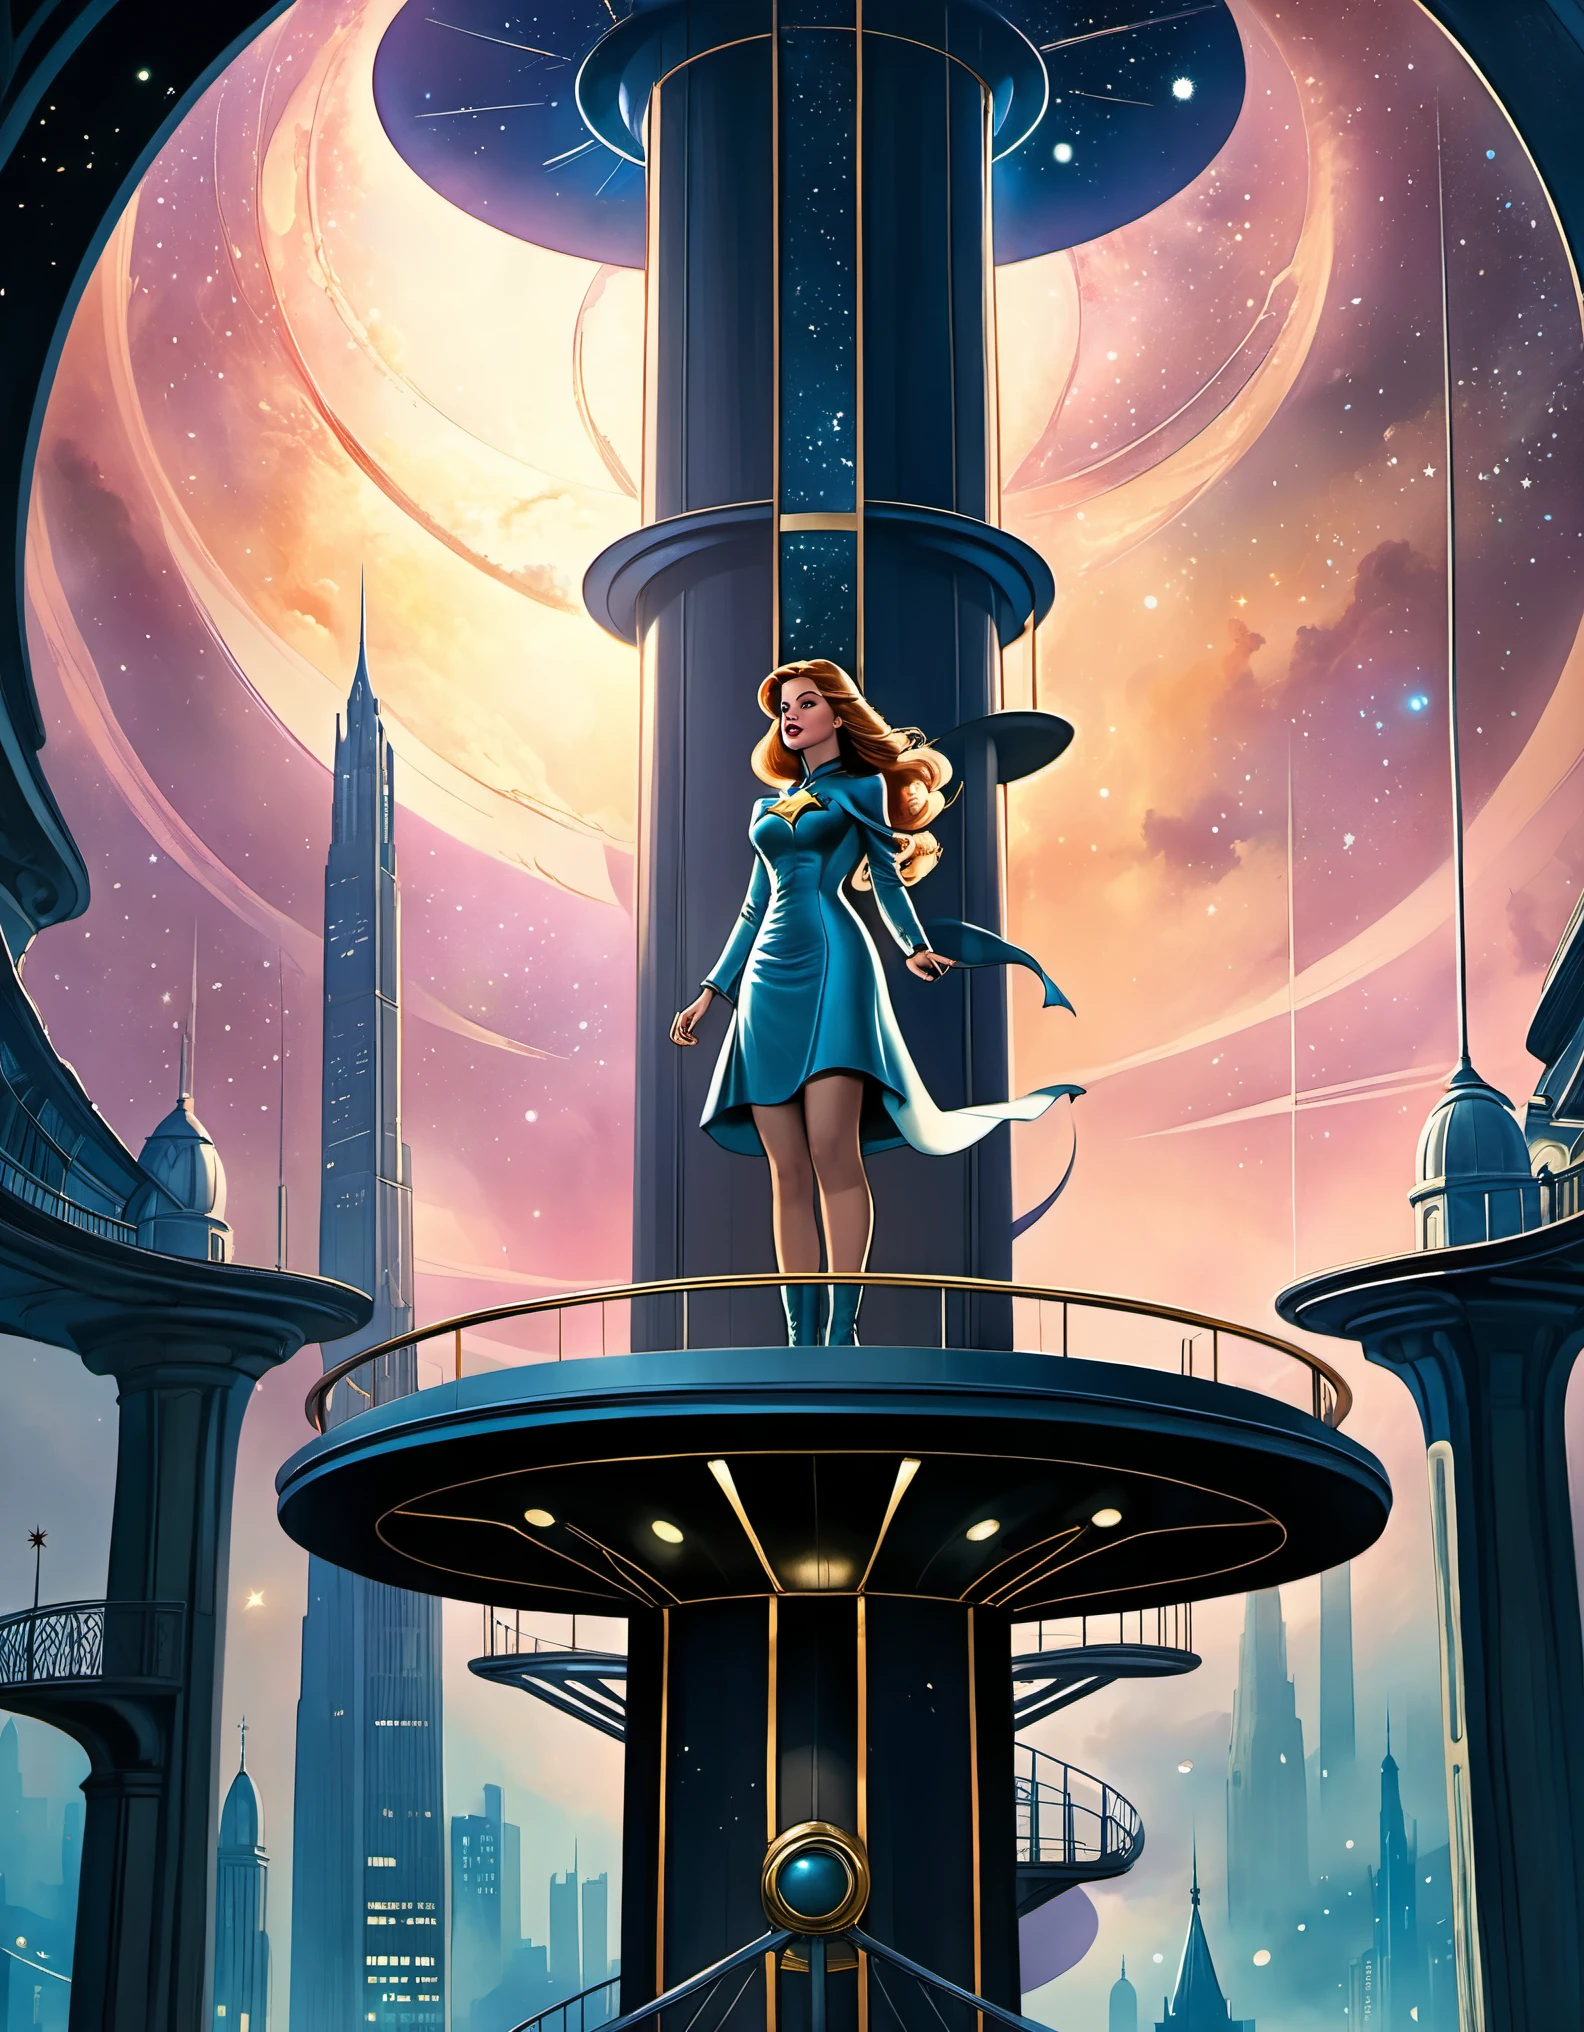 in style of Dan Seagrave, beautiful details，in style of Caia Koopman, beautiful details，Star Observation Tower，Heroine，Ancient，Retro，Cartoon photography combined